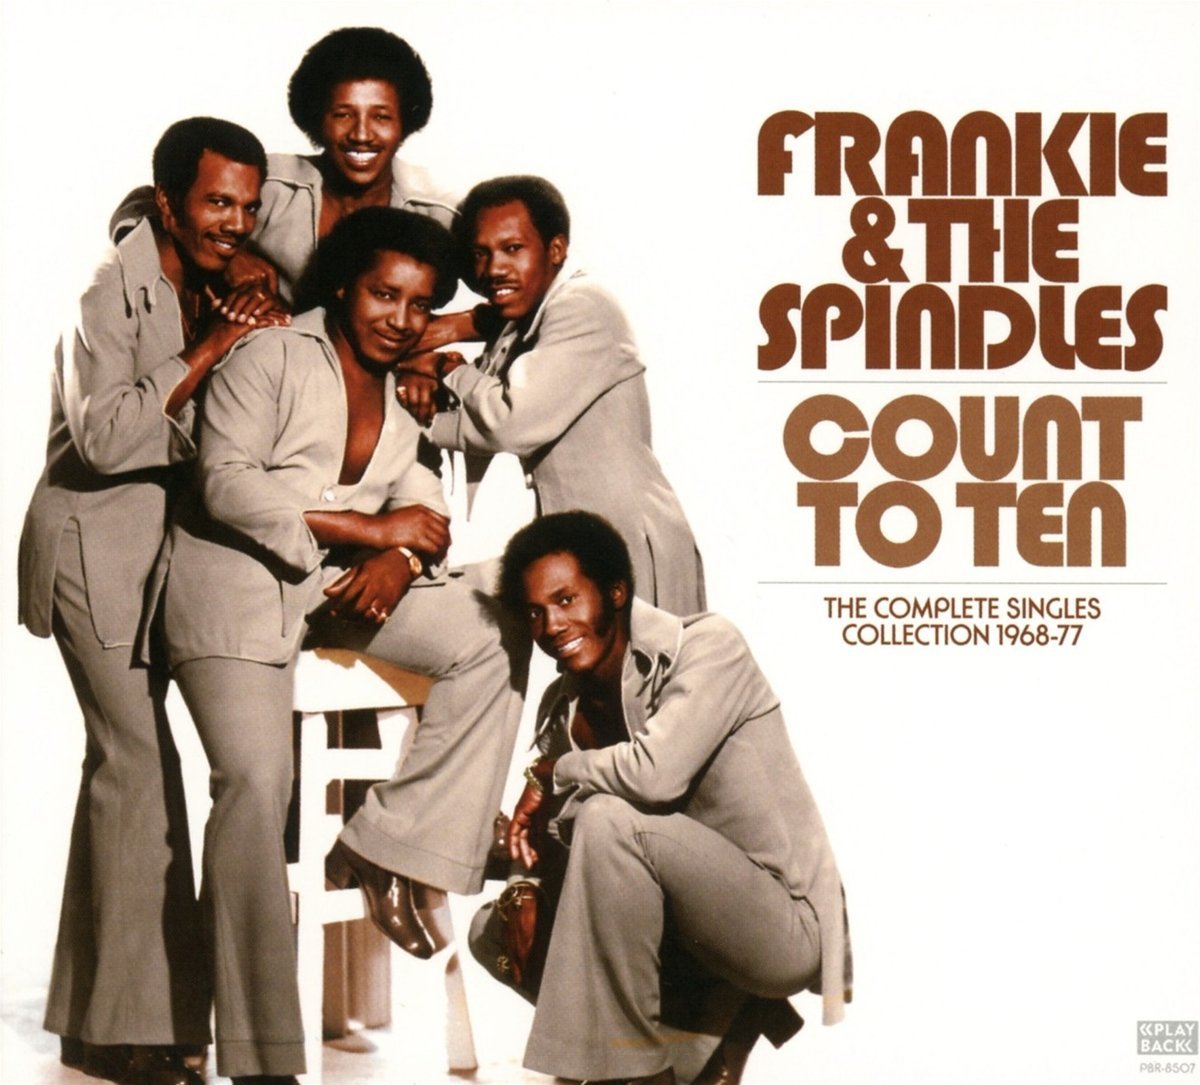 FRANKIE & THE SPINDLES / COUNT TO TEM, THE COMPLETE